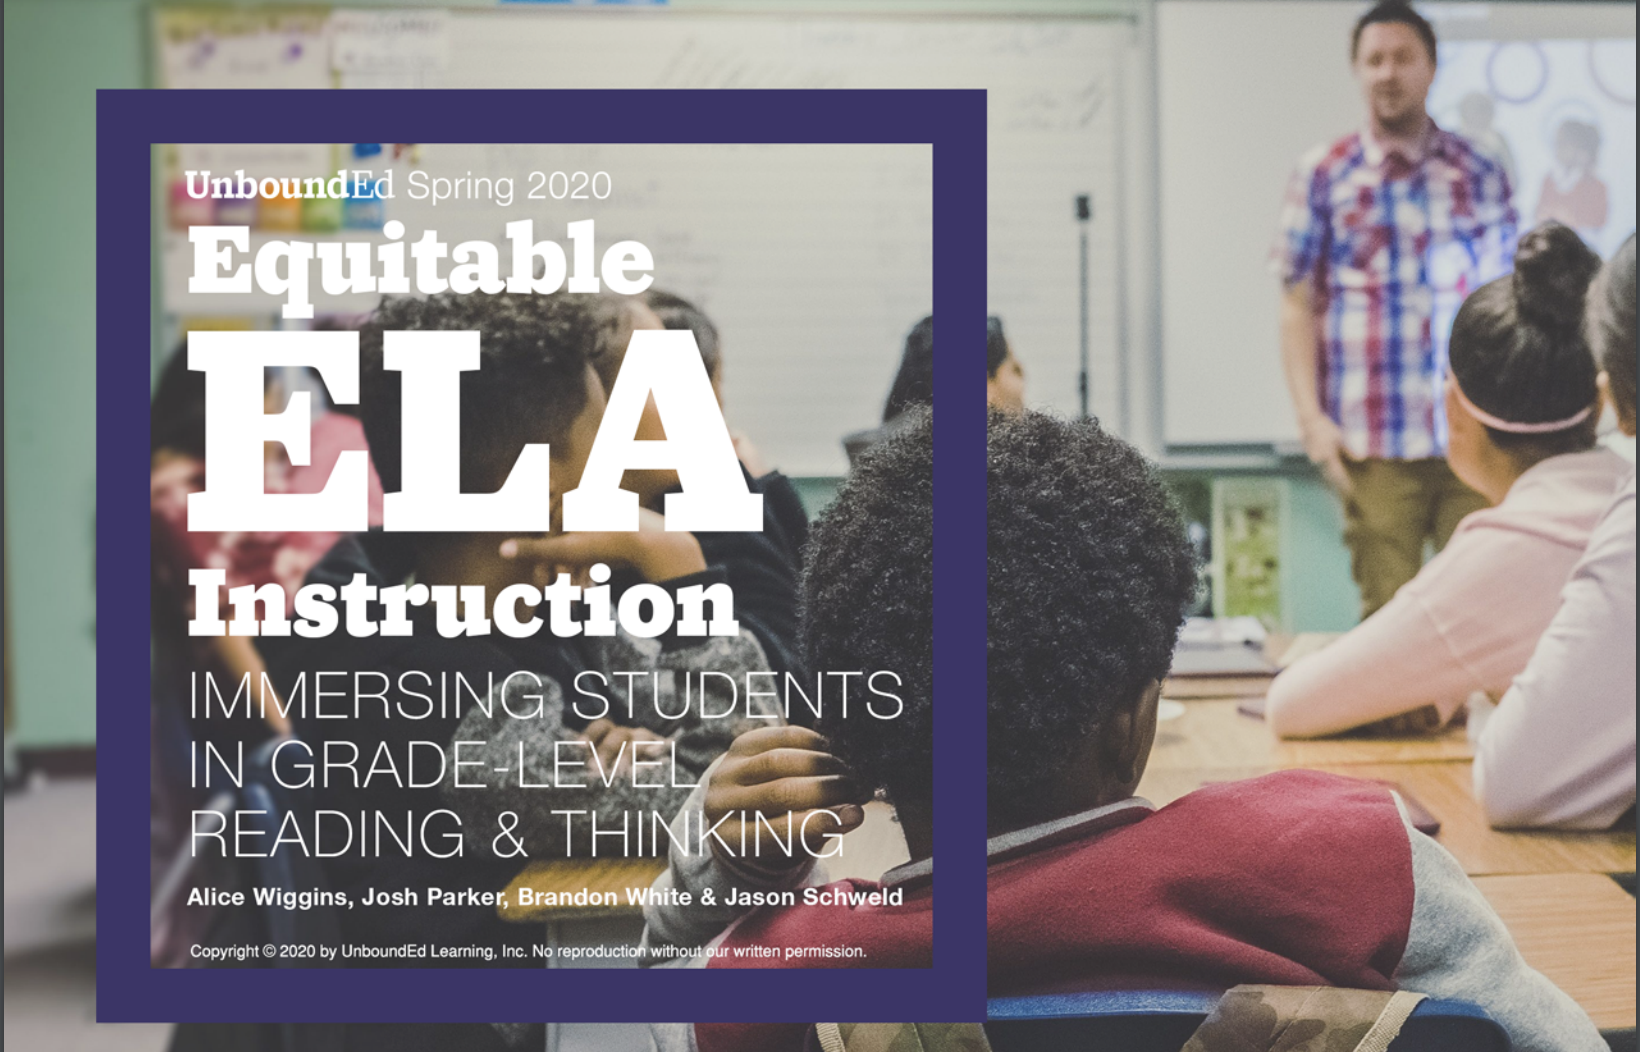 Question: What Does Equitable ELA Instruction Require?